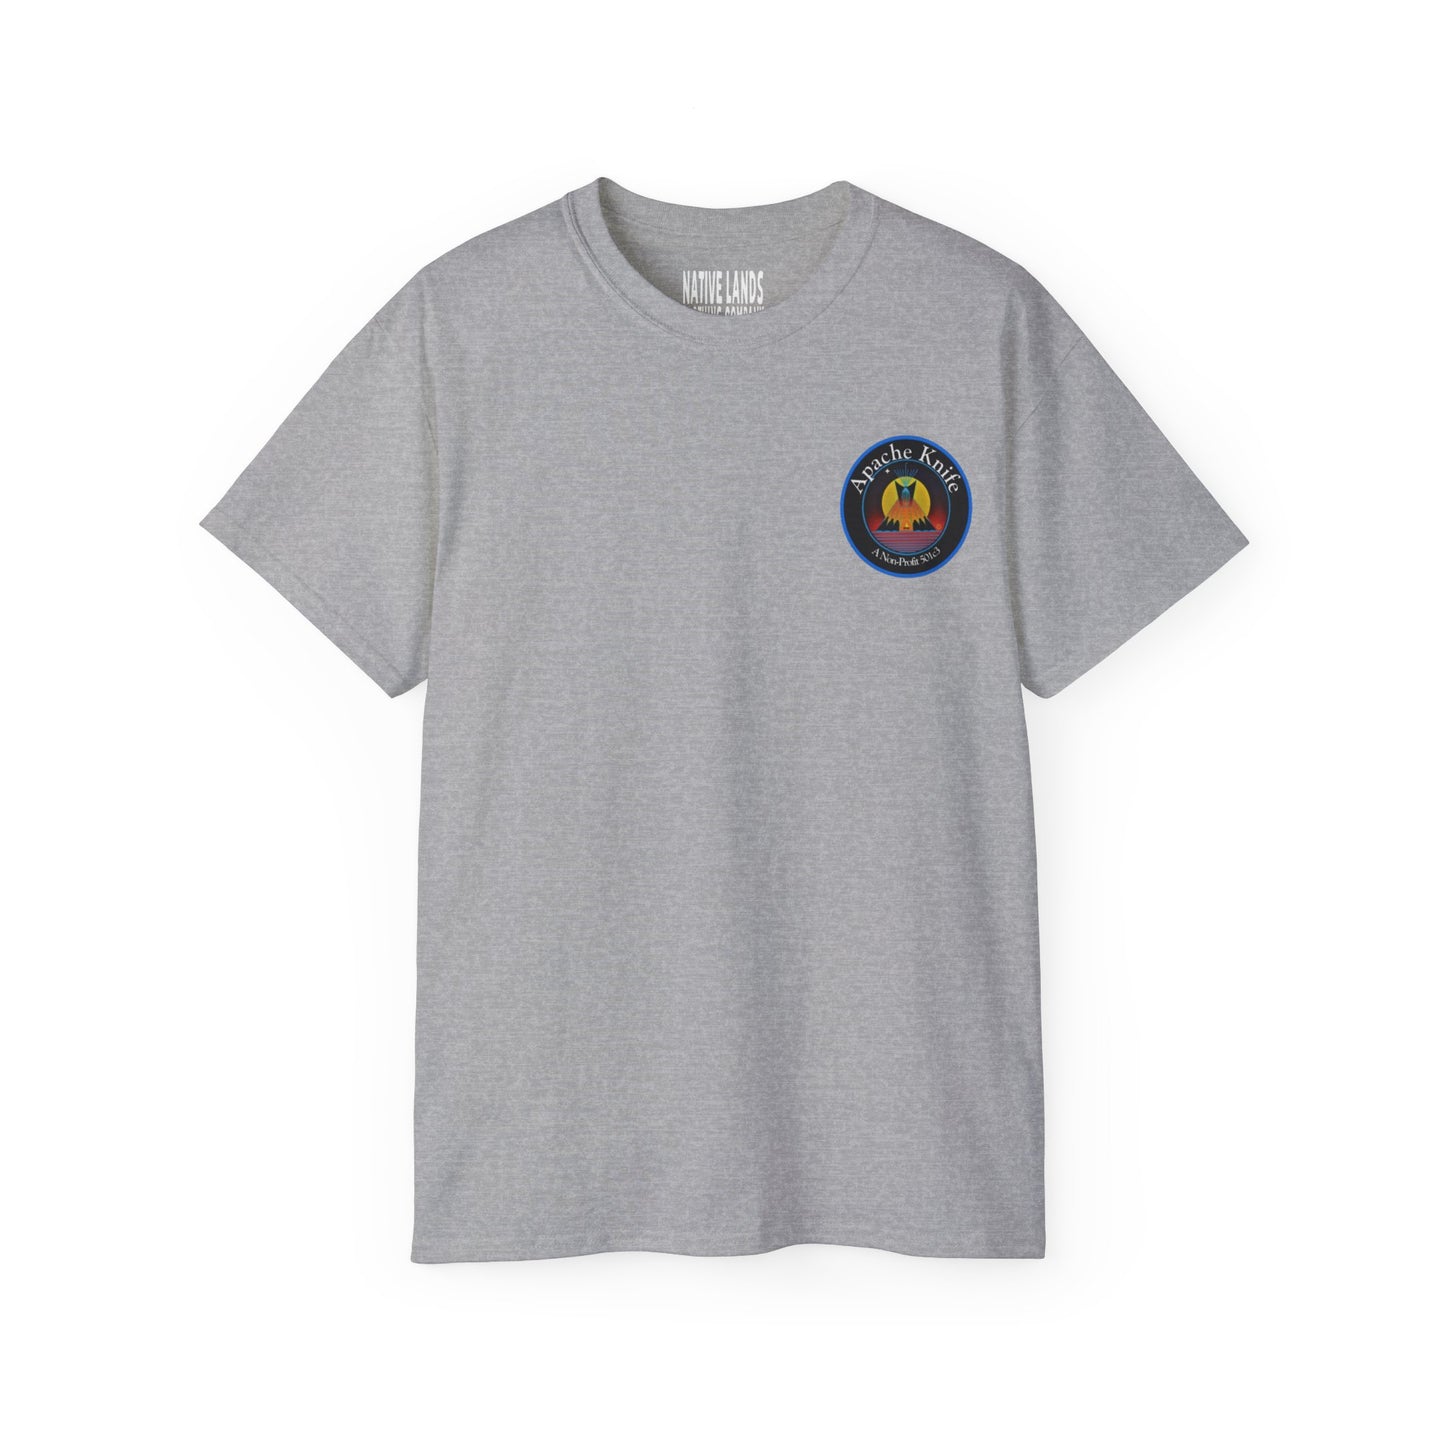 Apache Knife Foundation Shirt Non-Profit Native American (Special Order)